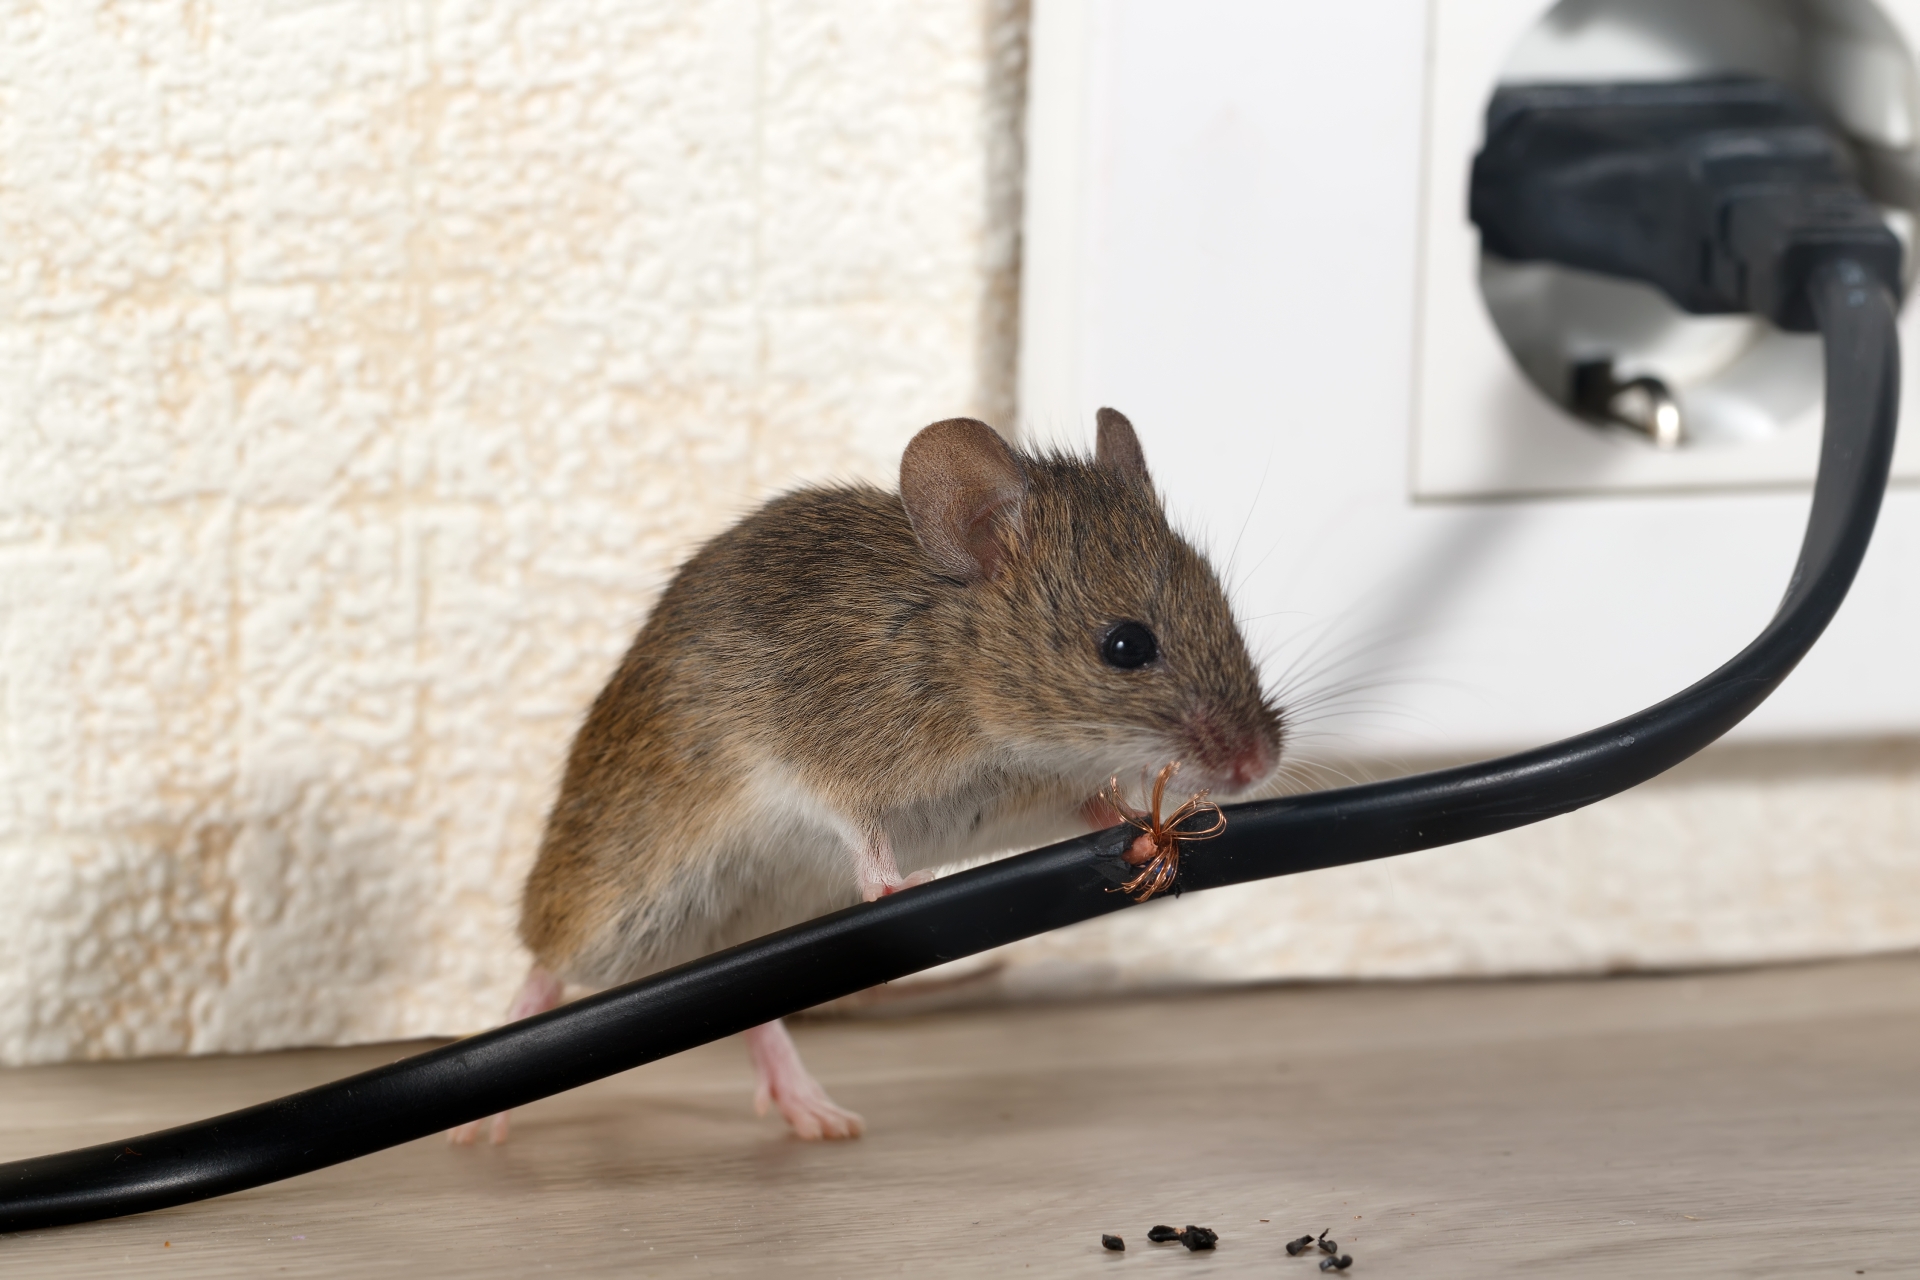 Mice Infestation, Pest Control in Penge, Anerley, SE20. Call Now 020 8166 9746